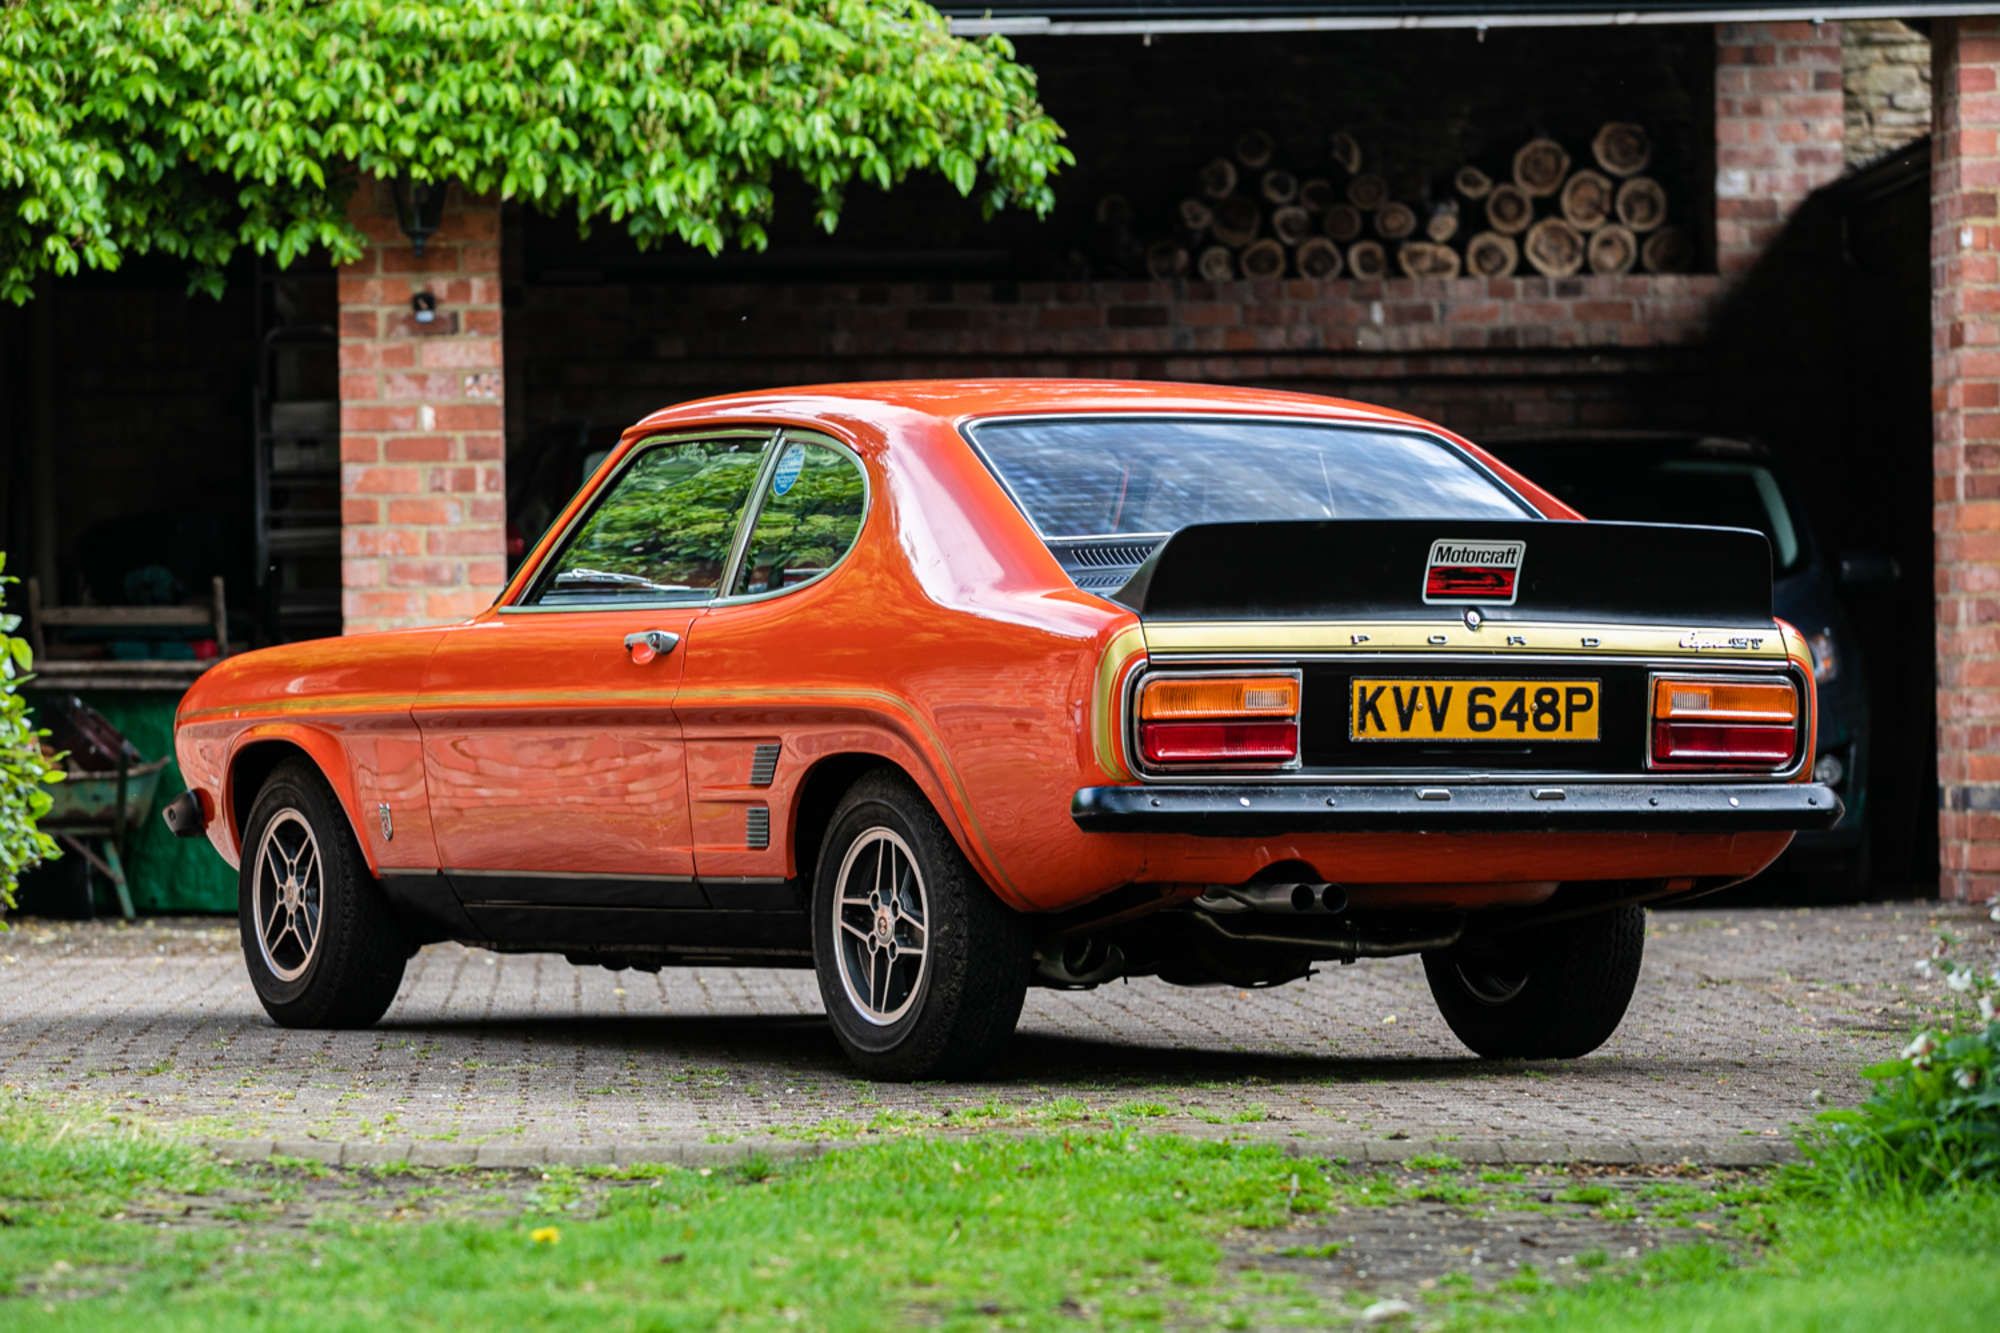 The rear end of the 1975 Ford Capri RS3100.